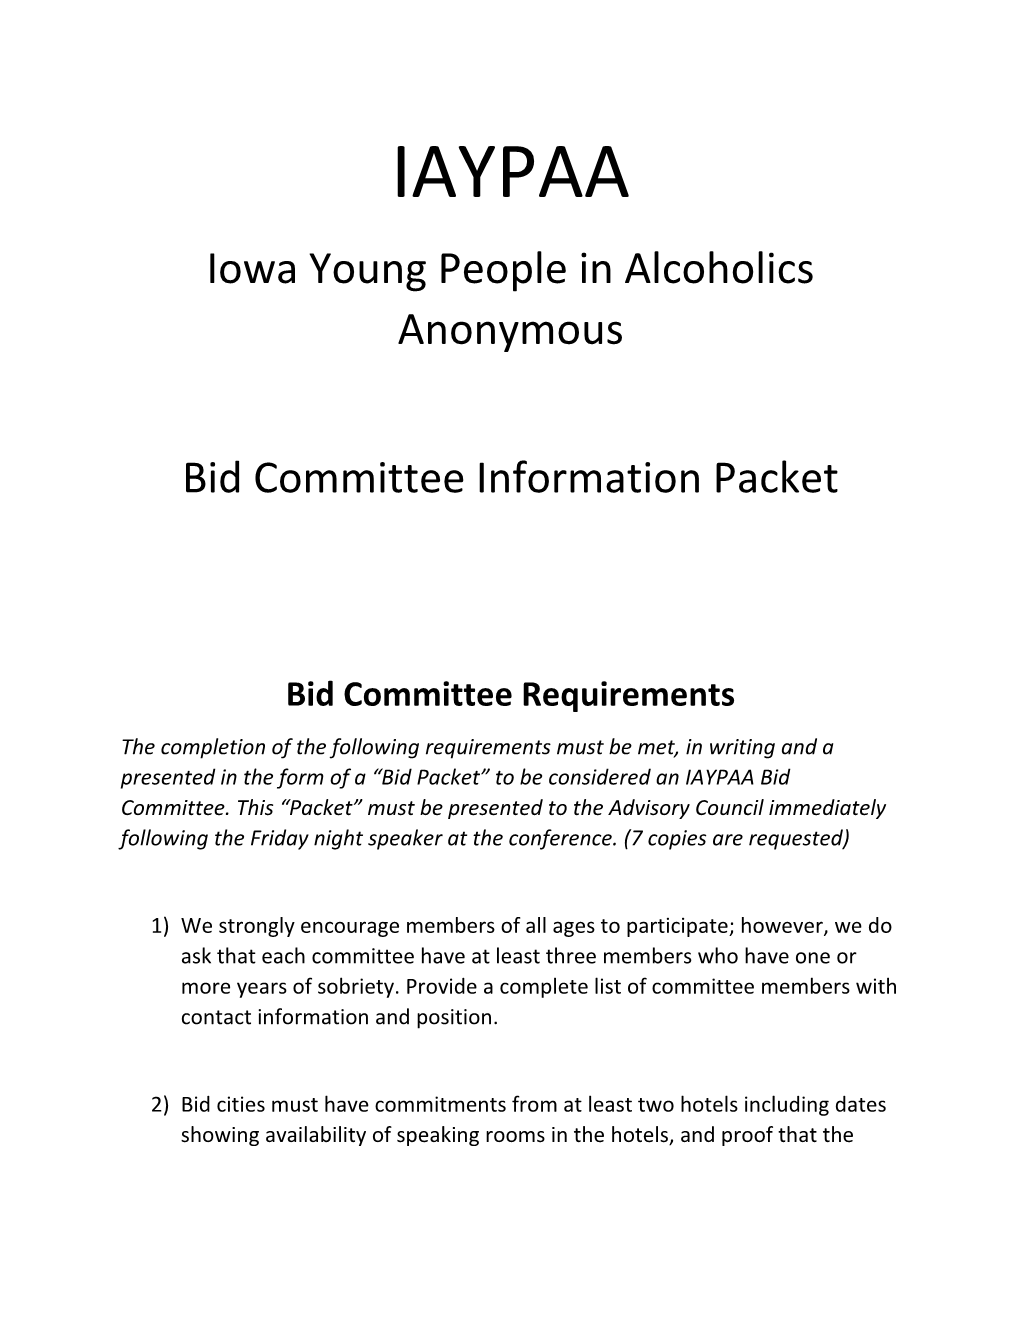 Iowa Young People in Alcoholics Anonymous